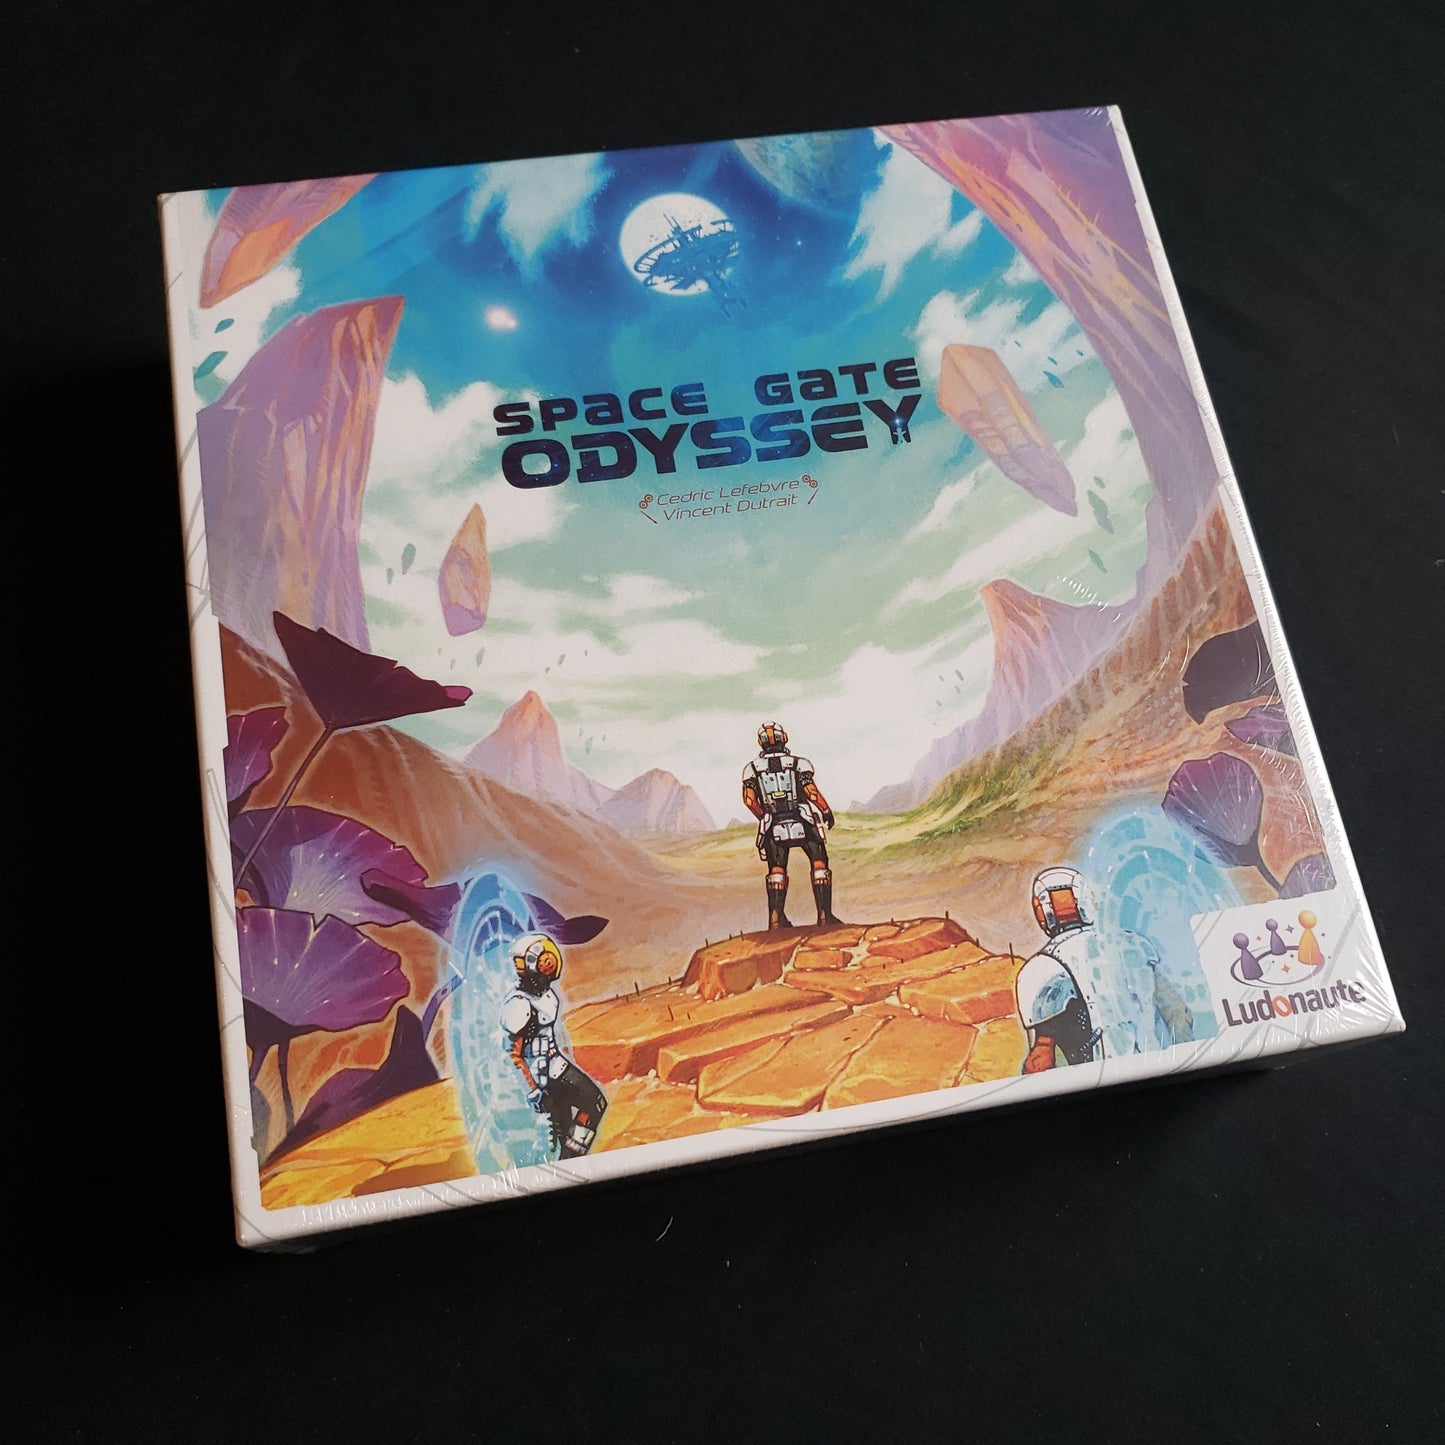 Image shows the front cover of the box of the Space Gate Odyssey board game